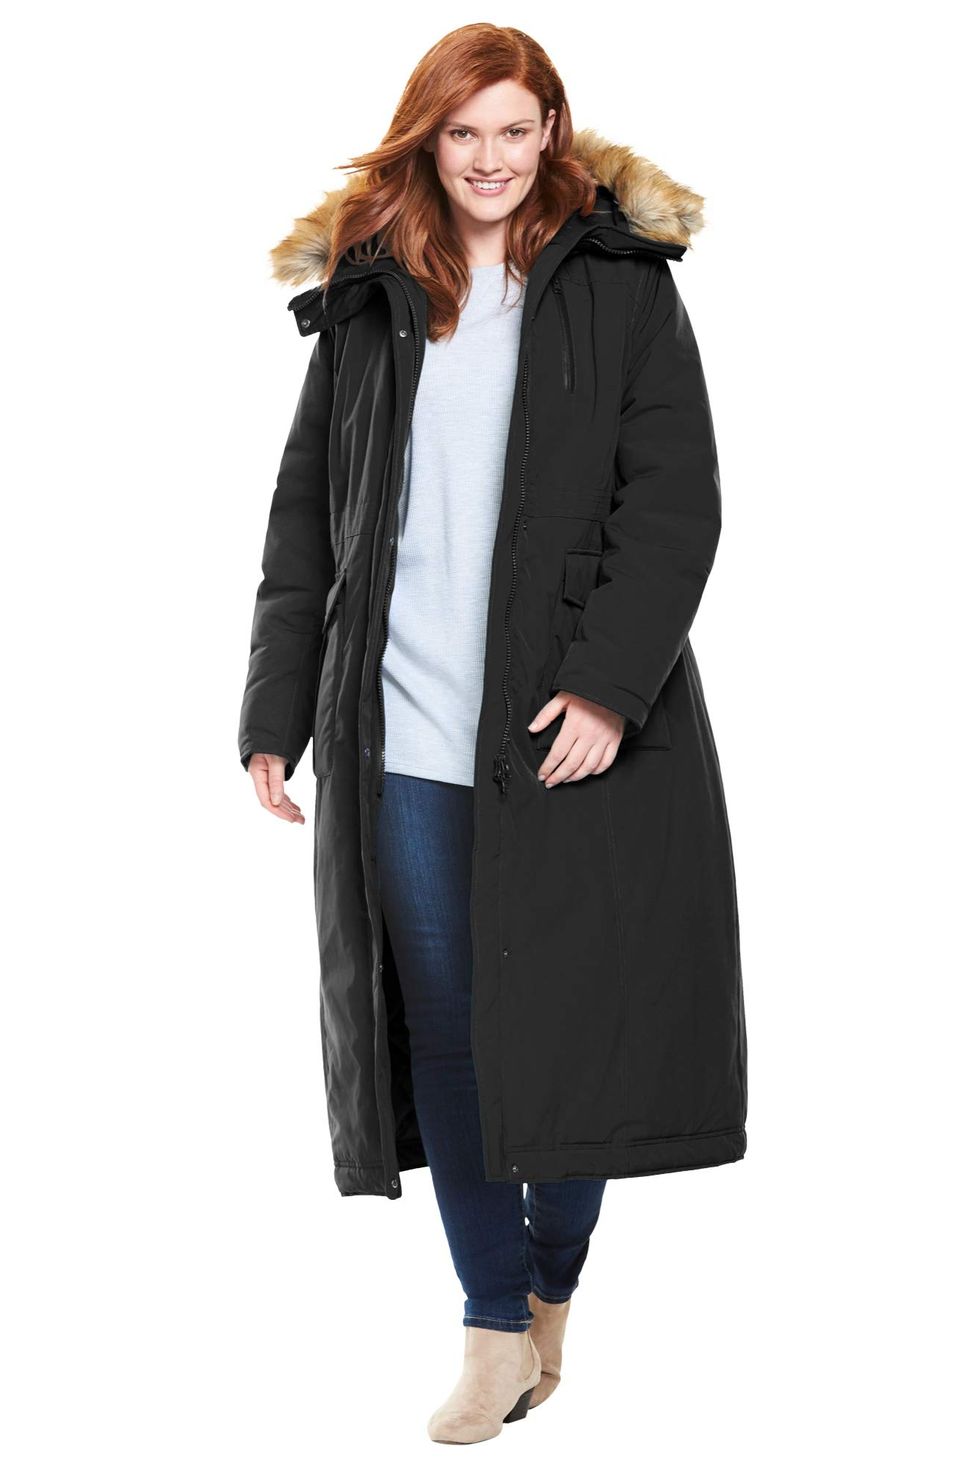 Plus Size Womens Winter Coat Clearance - Stylish Curves